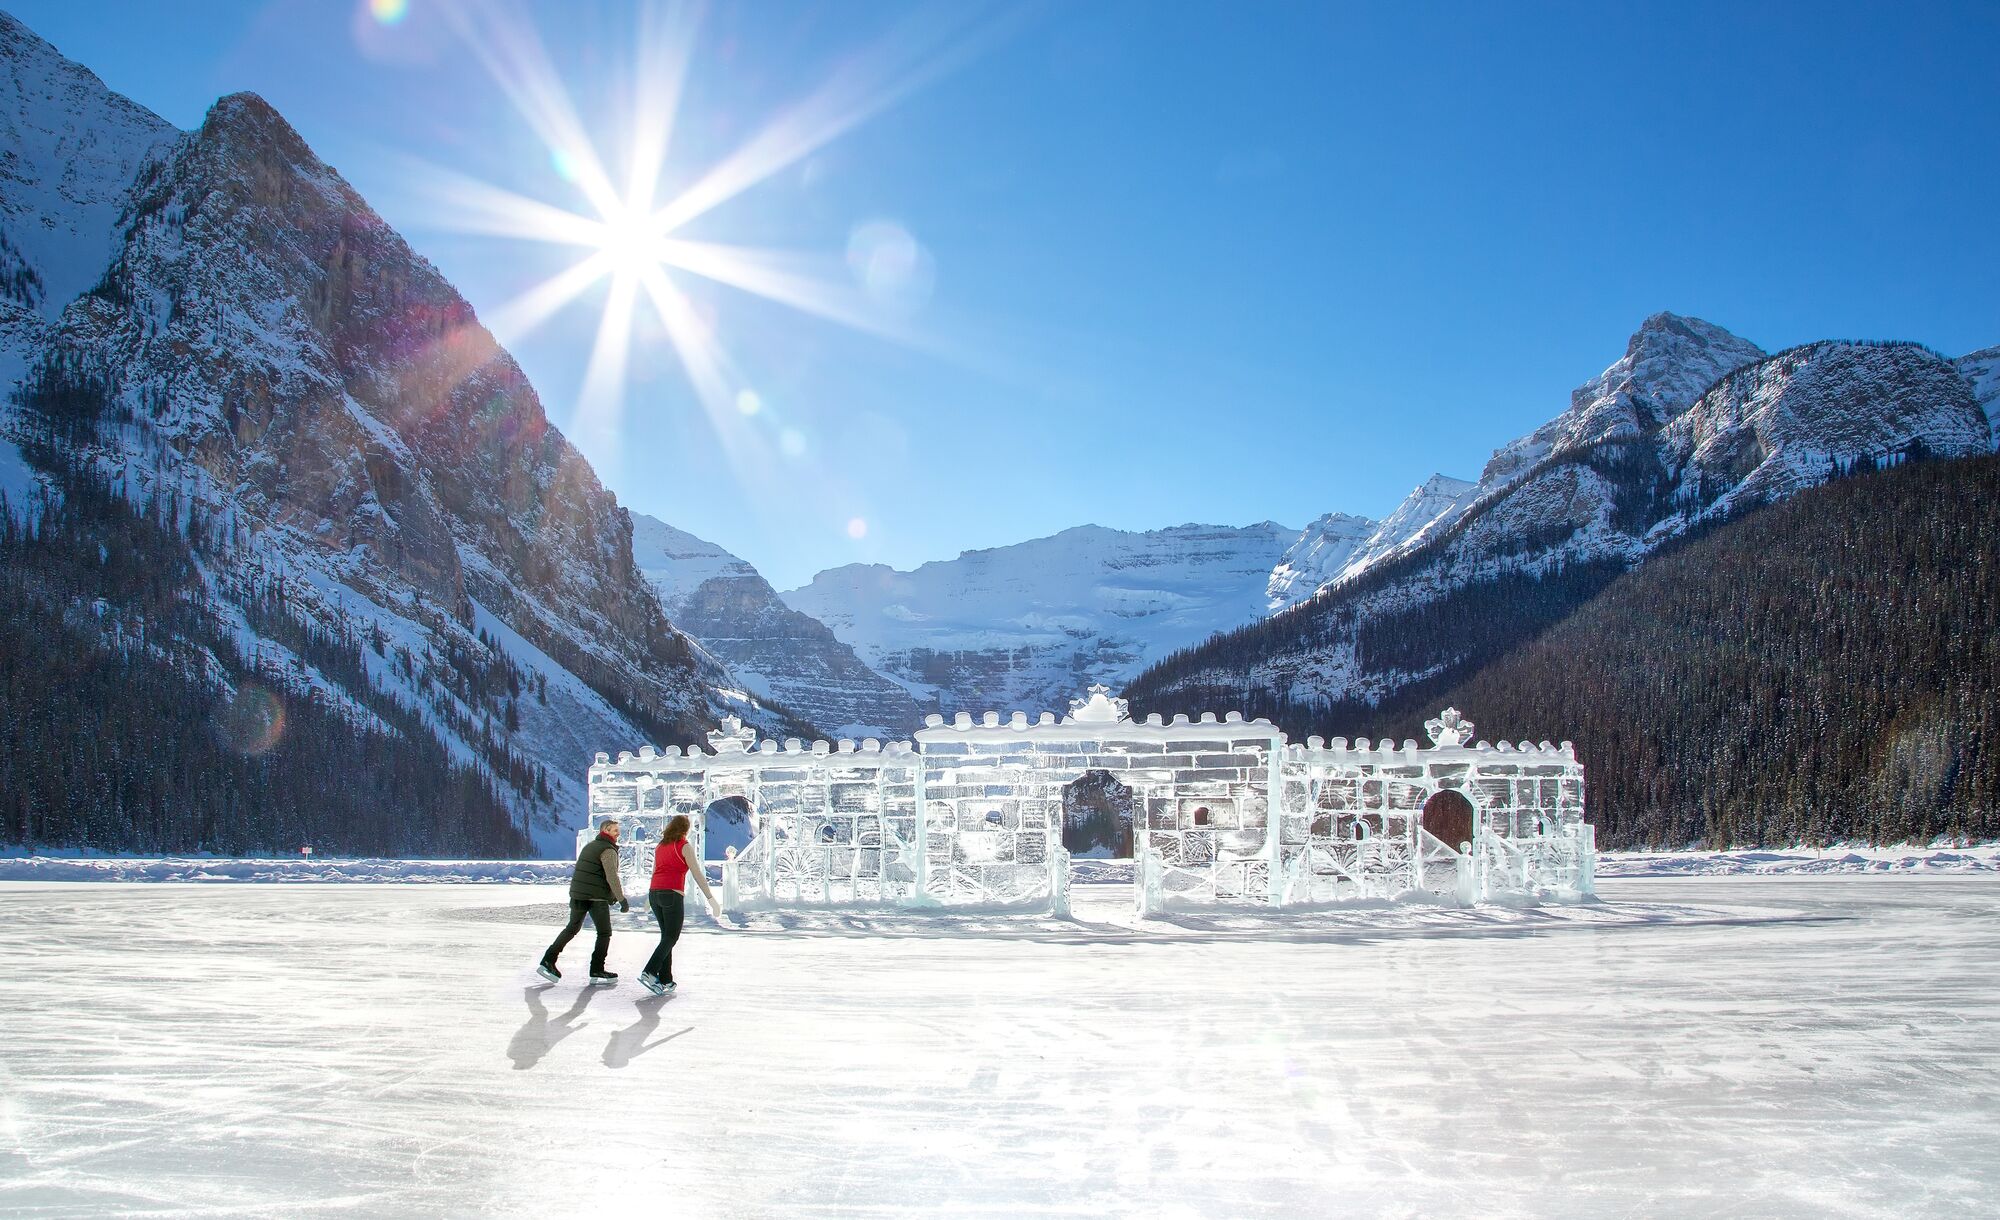 A couple skates by the ice castle on Lake Louise in Banff National Park.